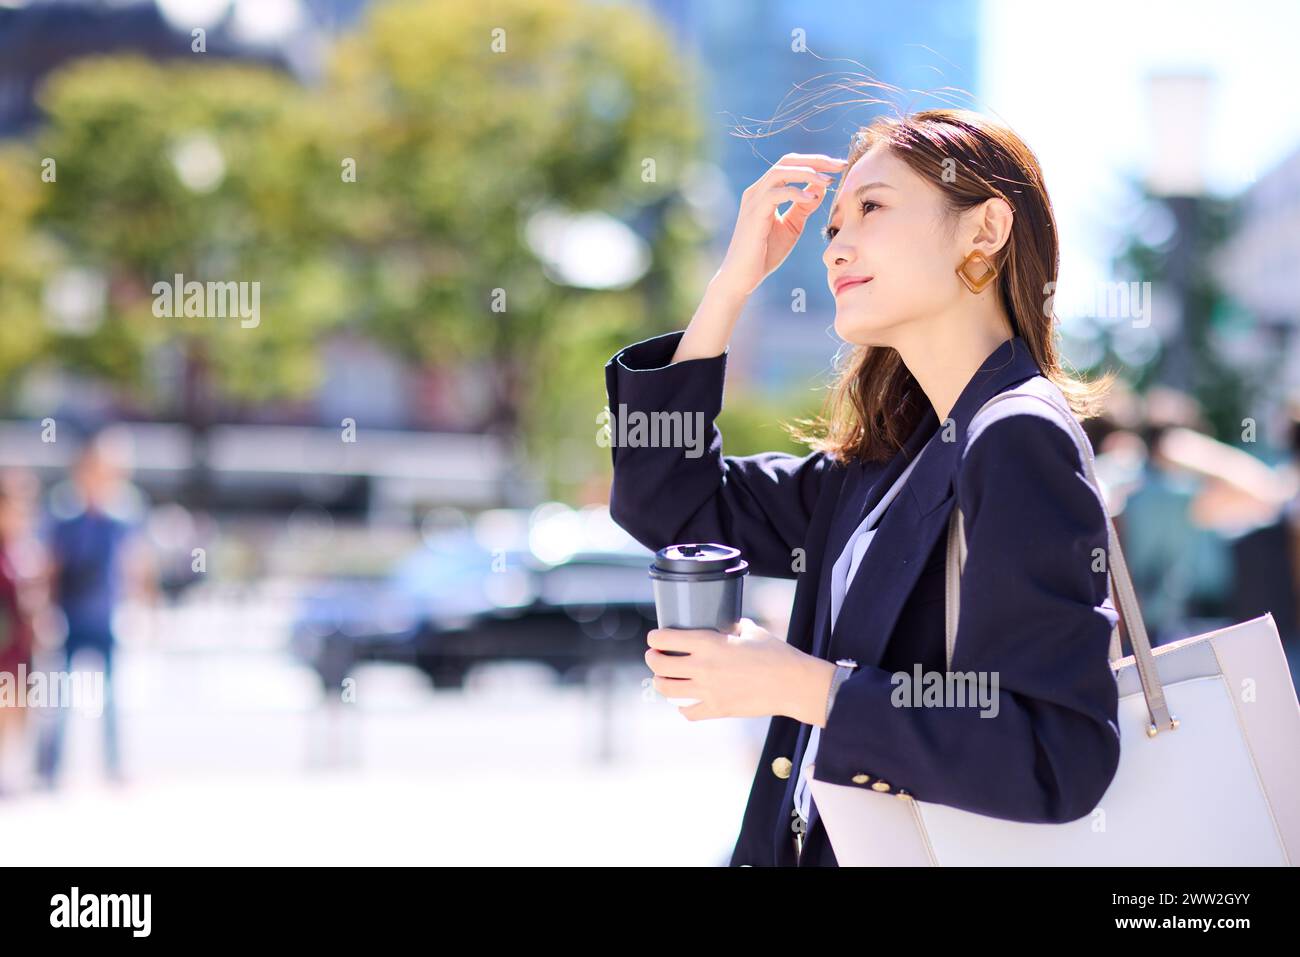 A woman in a business suit holding a coffee cup Stock Photo